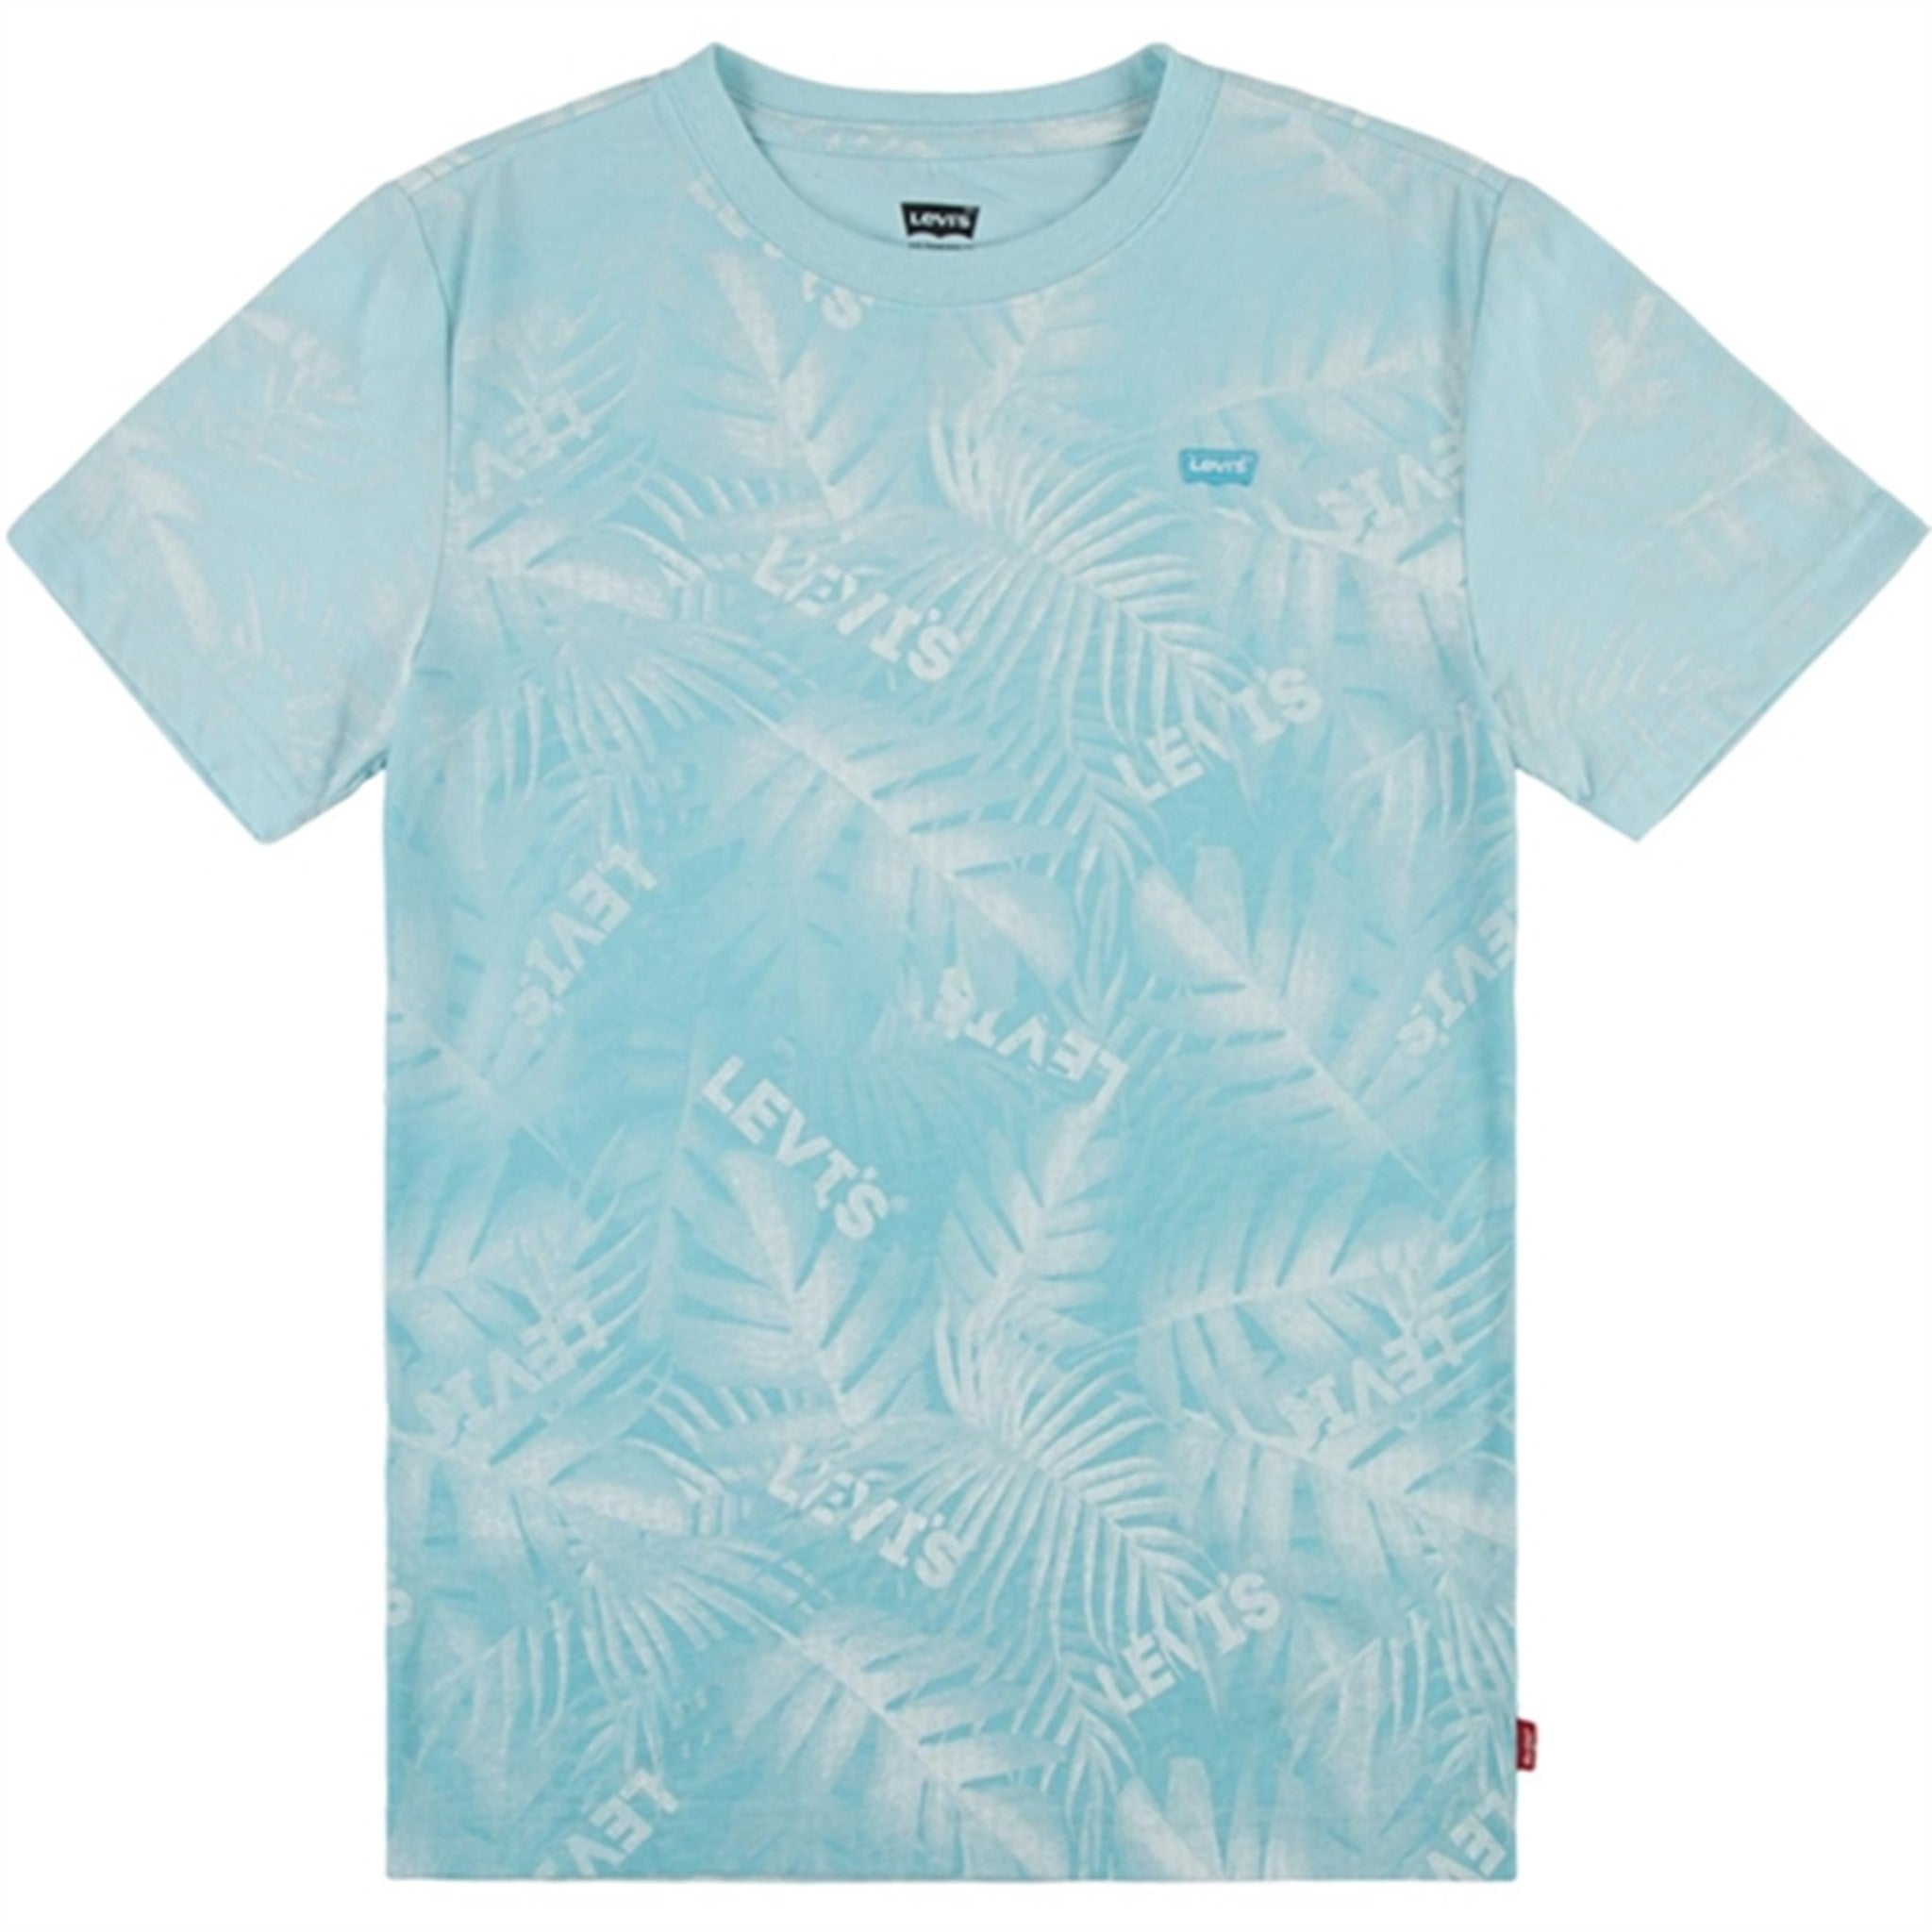 Levi's Barely There Palm T-Shirt Stillwater